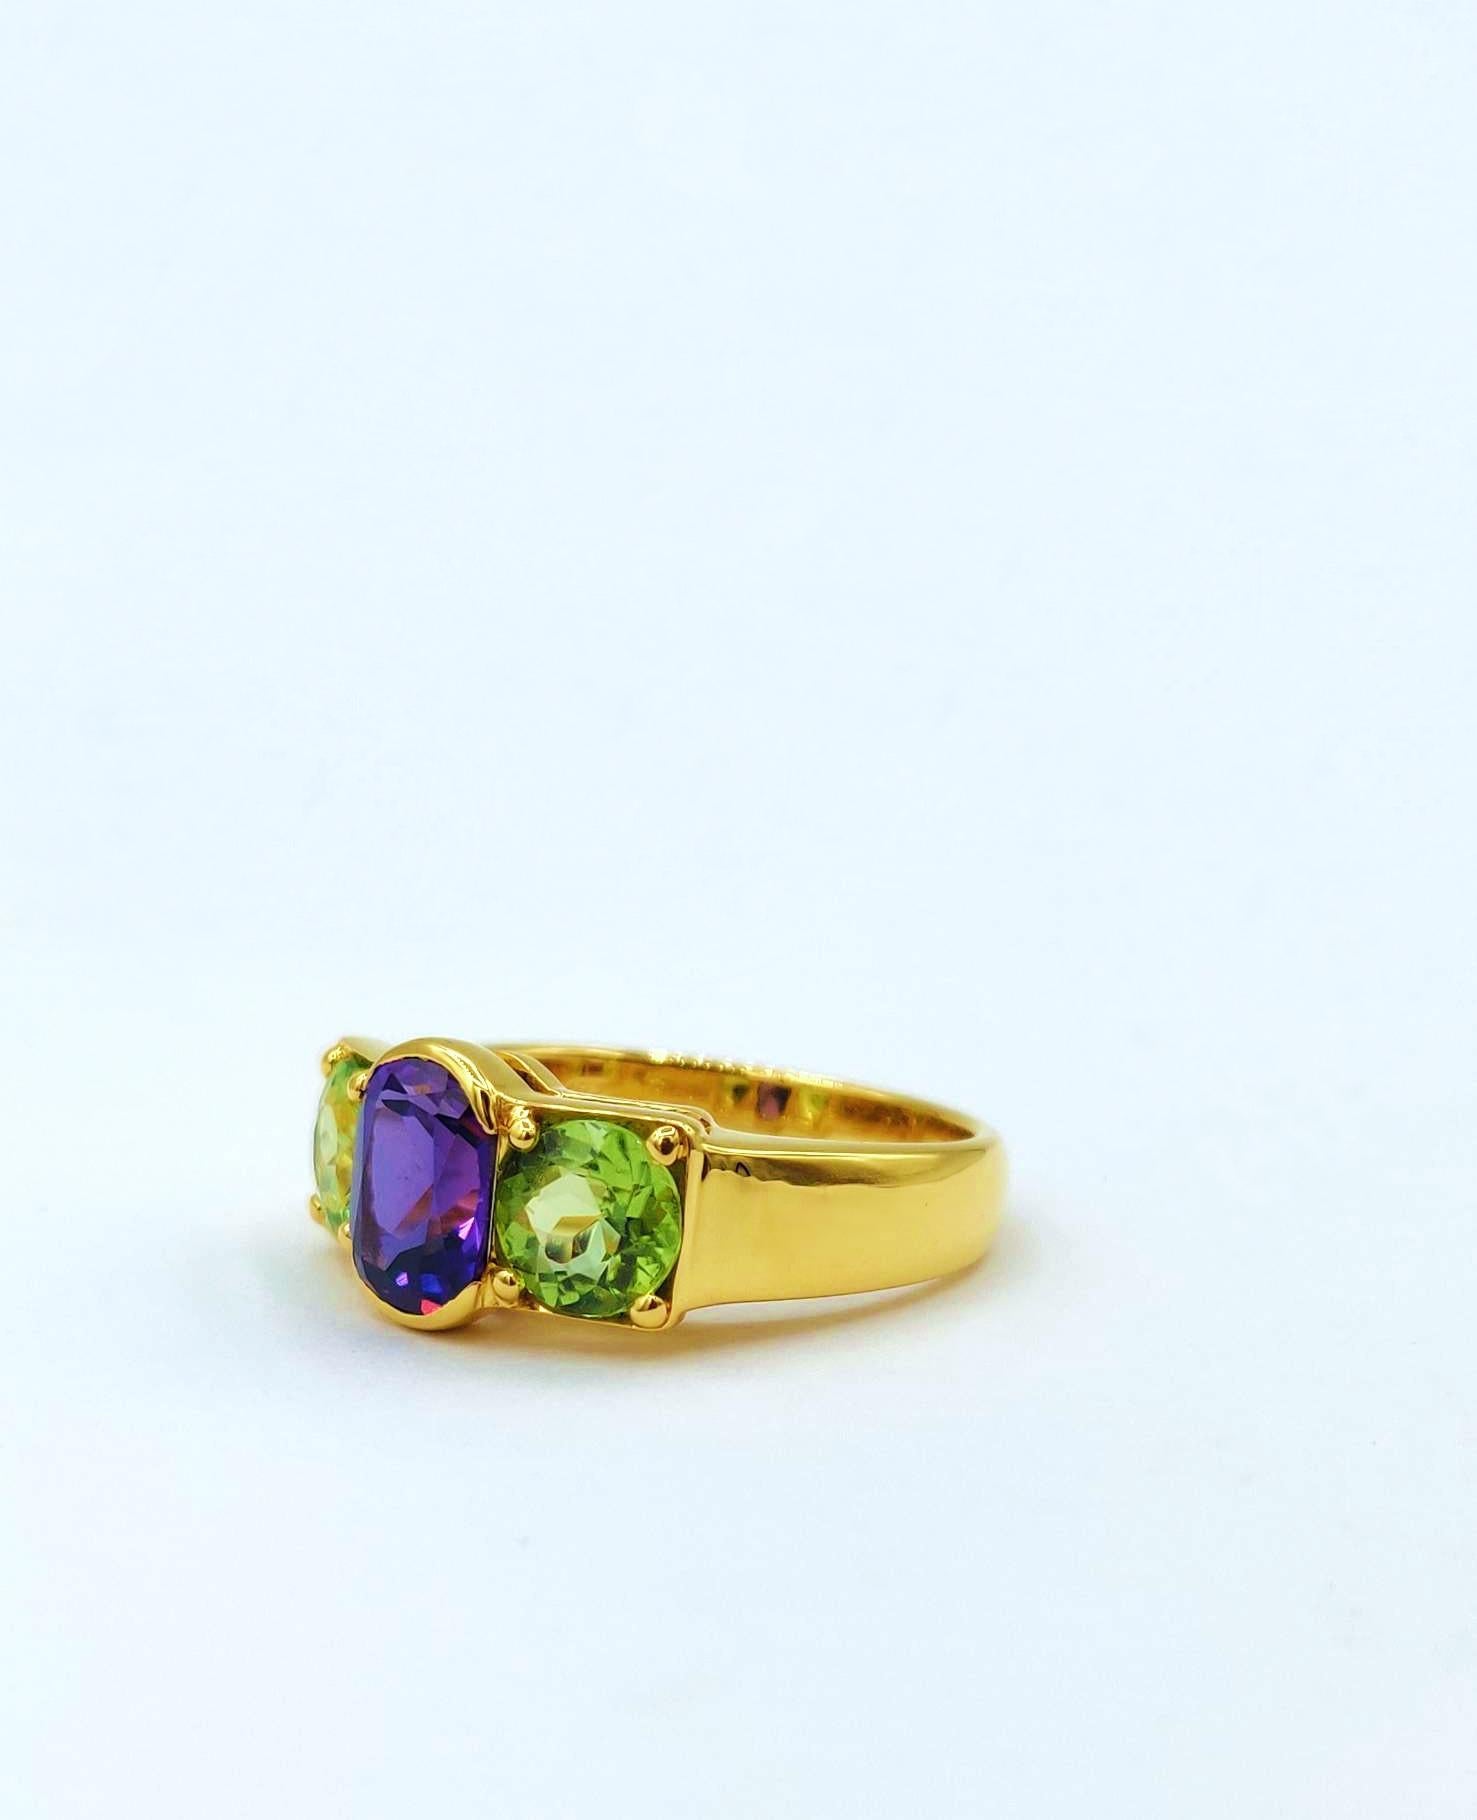 Three-Stone Ring in the Colours of Vanda Orchid, Oval Purplish Amethyst between Round Peridot 18K Yellow Gold Ring

Gold: 18K Yellow Gold, 6.26 g
Amethyst: Oval, 1.45 ct
Peridot: Round, 1.77 ct

Ring size: 56